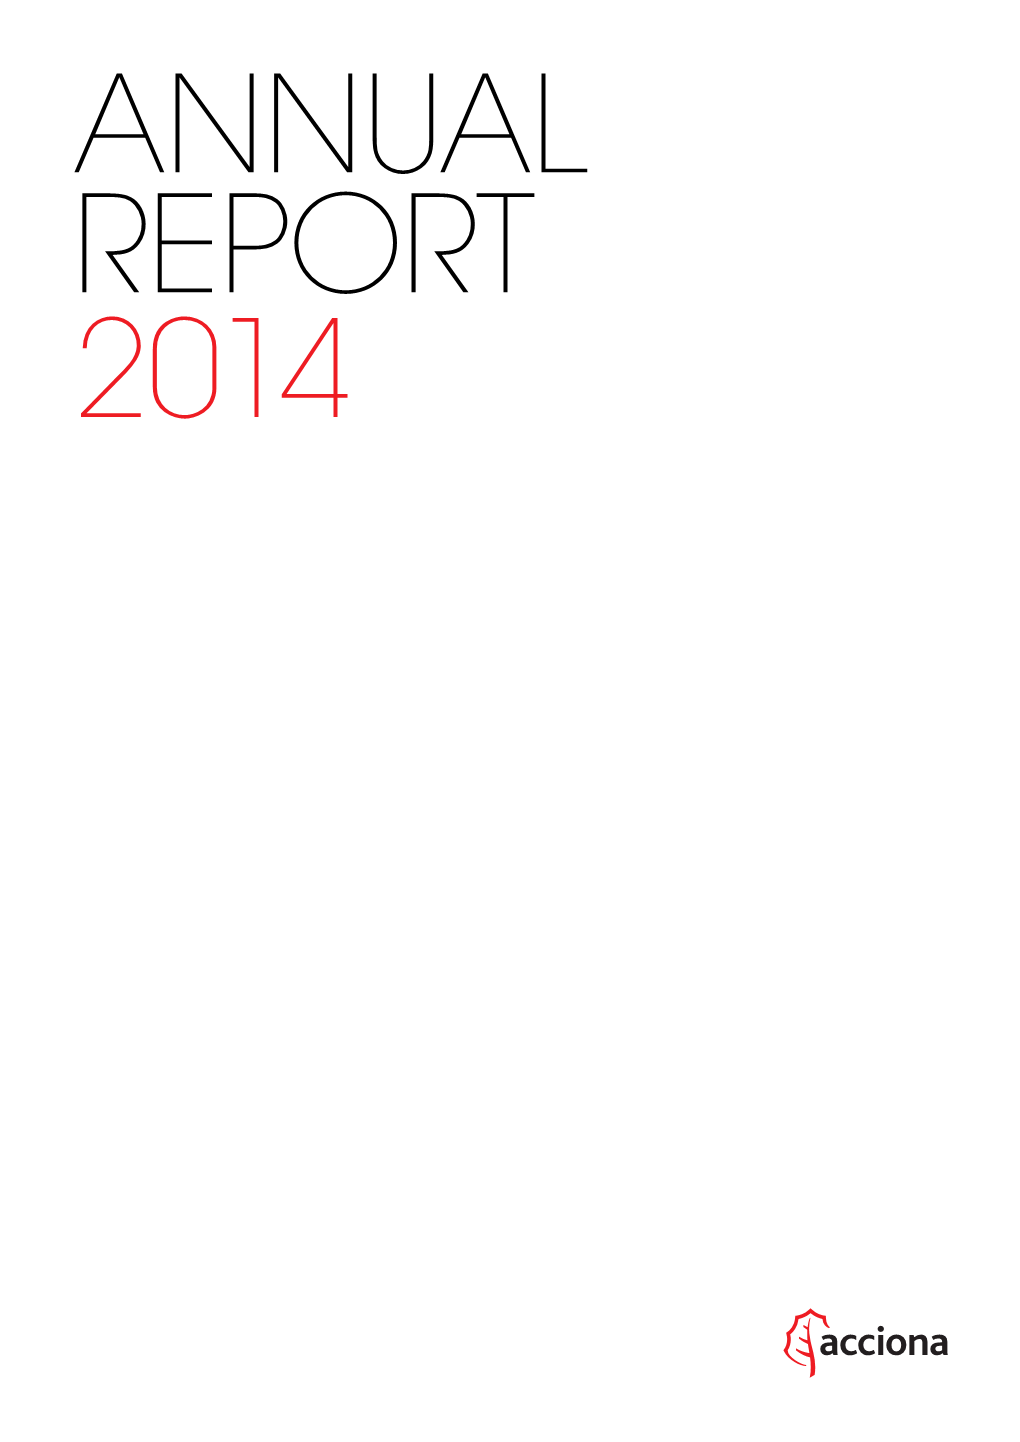 ACCIONA’S 2014 Annual Report Is Available in an Online Version